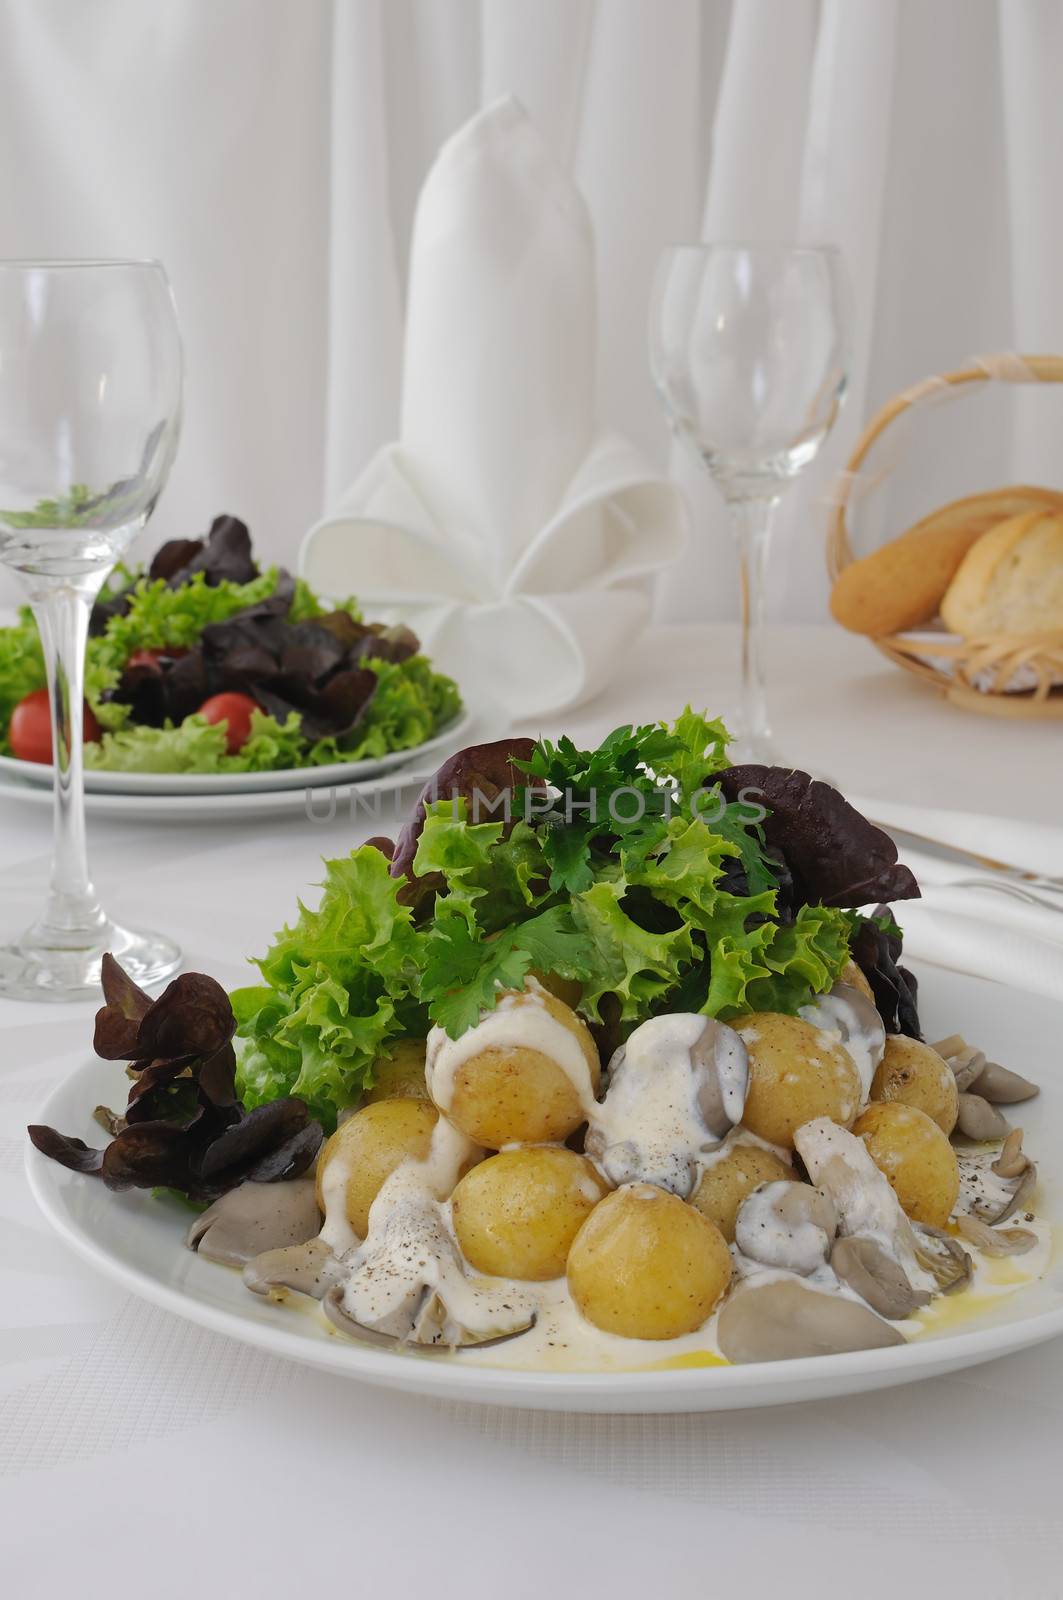  Fried potatoes with slices of mushroom and cream sauce by Apolonia